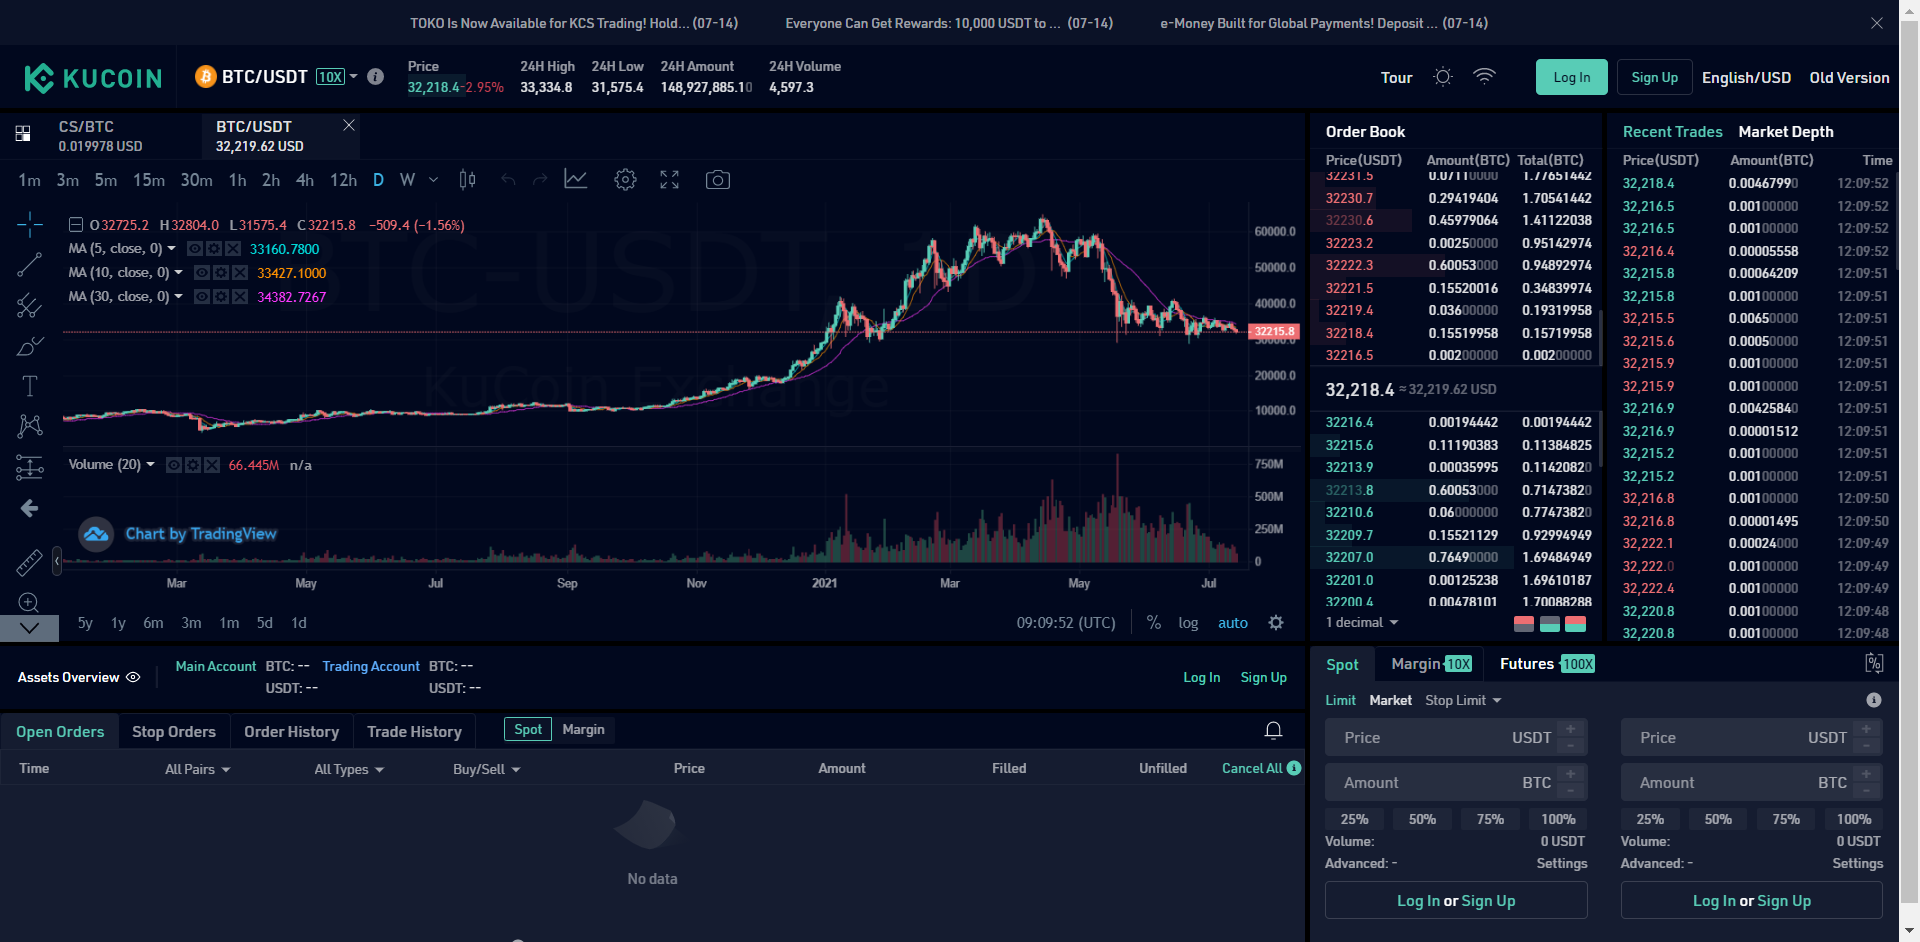 KuCoin implemented a classic trading dashboard